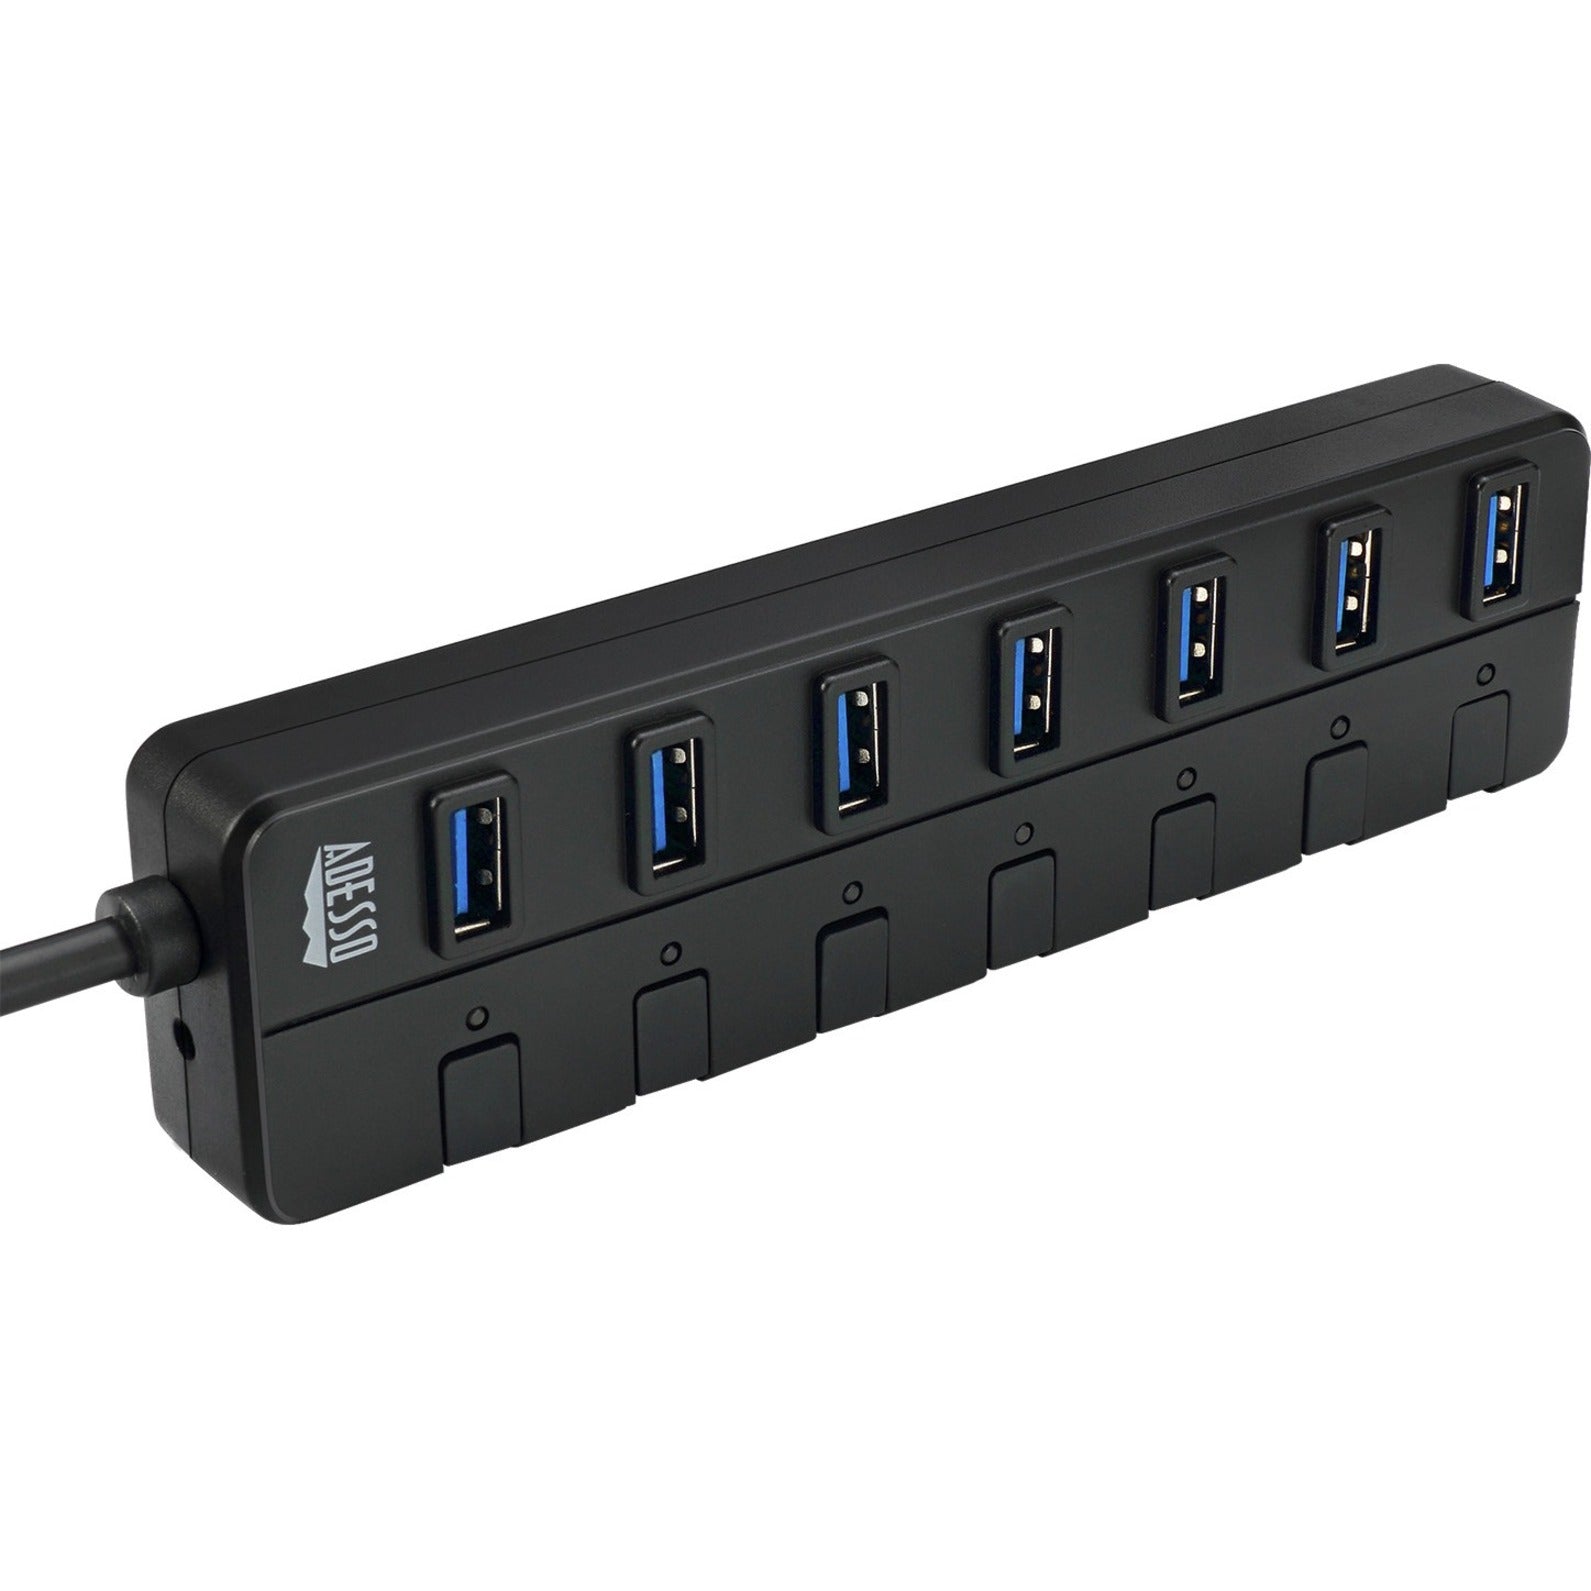 Adesso AUH-3070P 7-ports USB 3.0 Hub with 5V2A Power Adaptor, Mac/PC Compatible